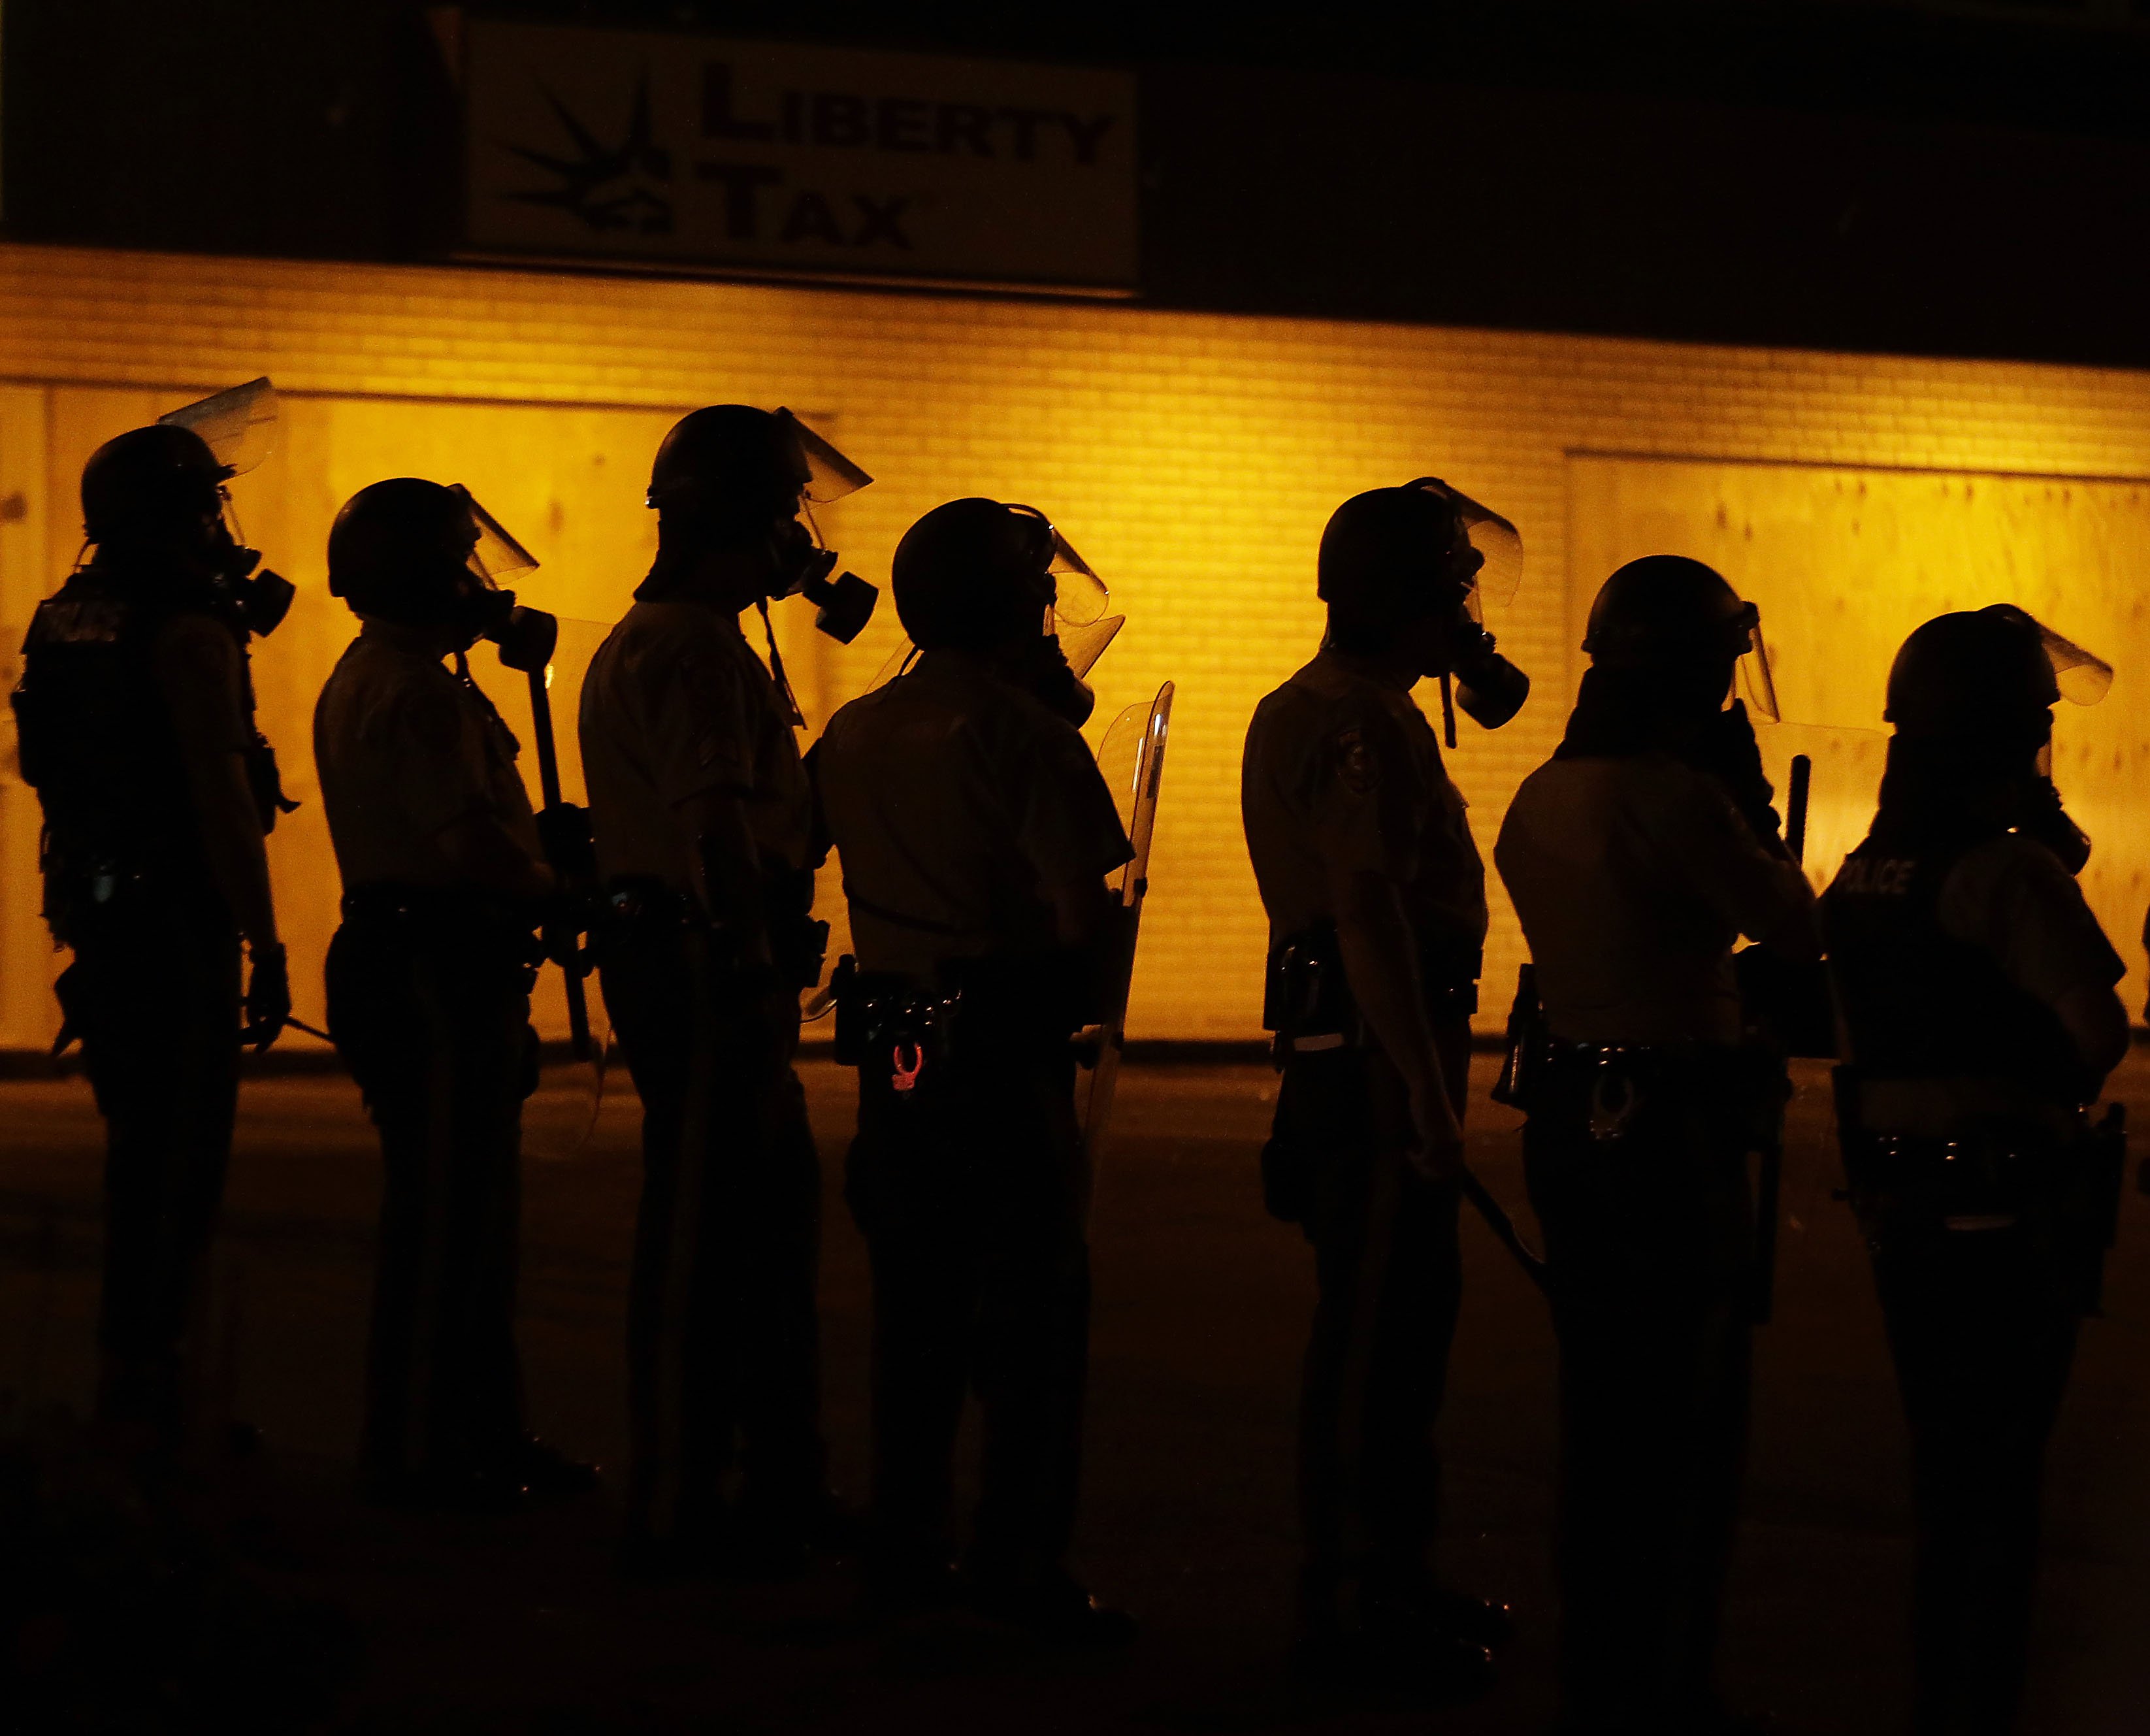 Police wait to advance after tear gas was used to disperse a crowd in Ferguson, Mo. on Aug. 17, 2014. (Charlie Riedel—AP)